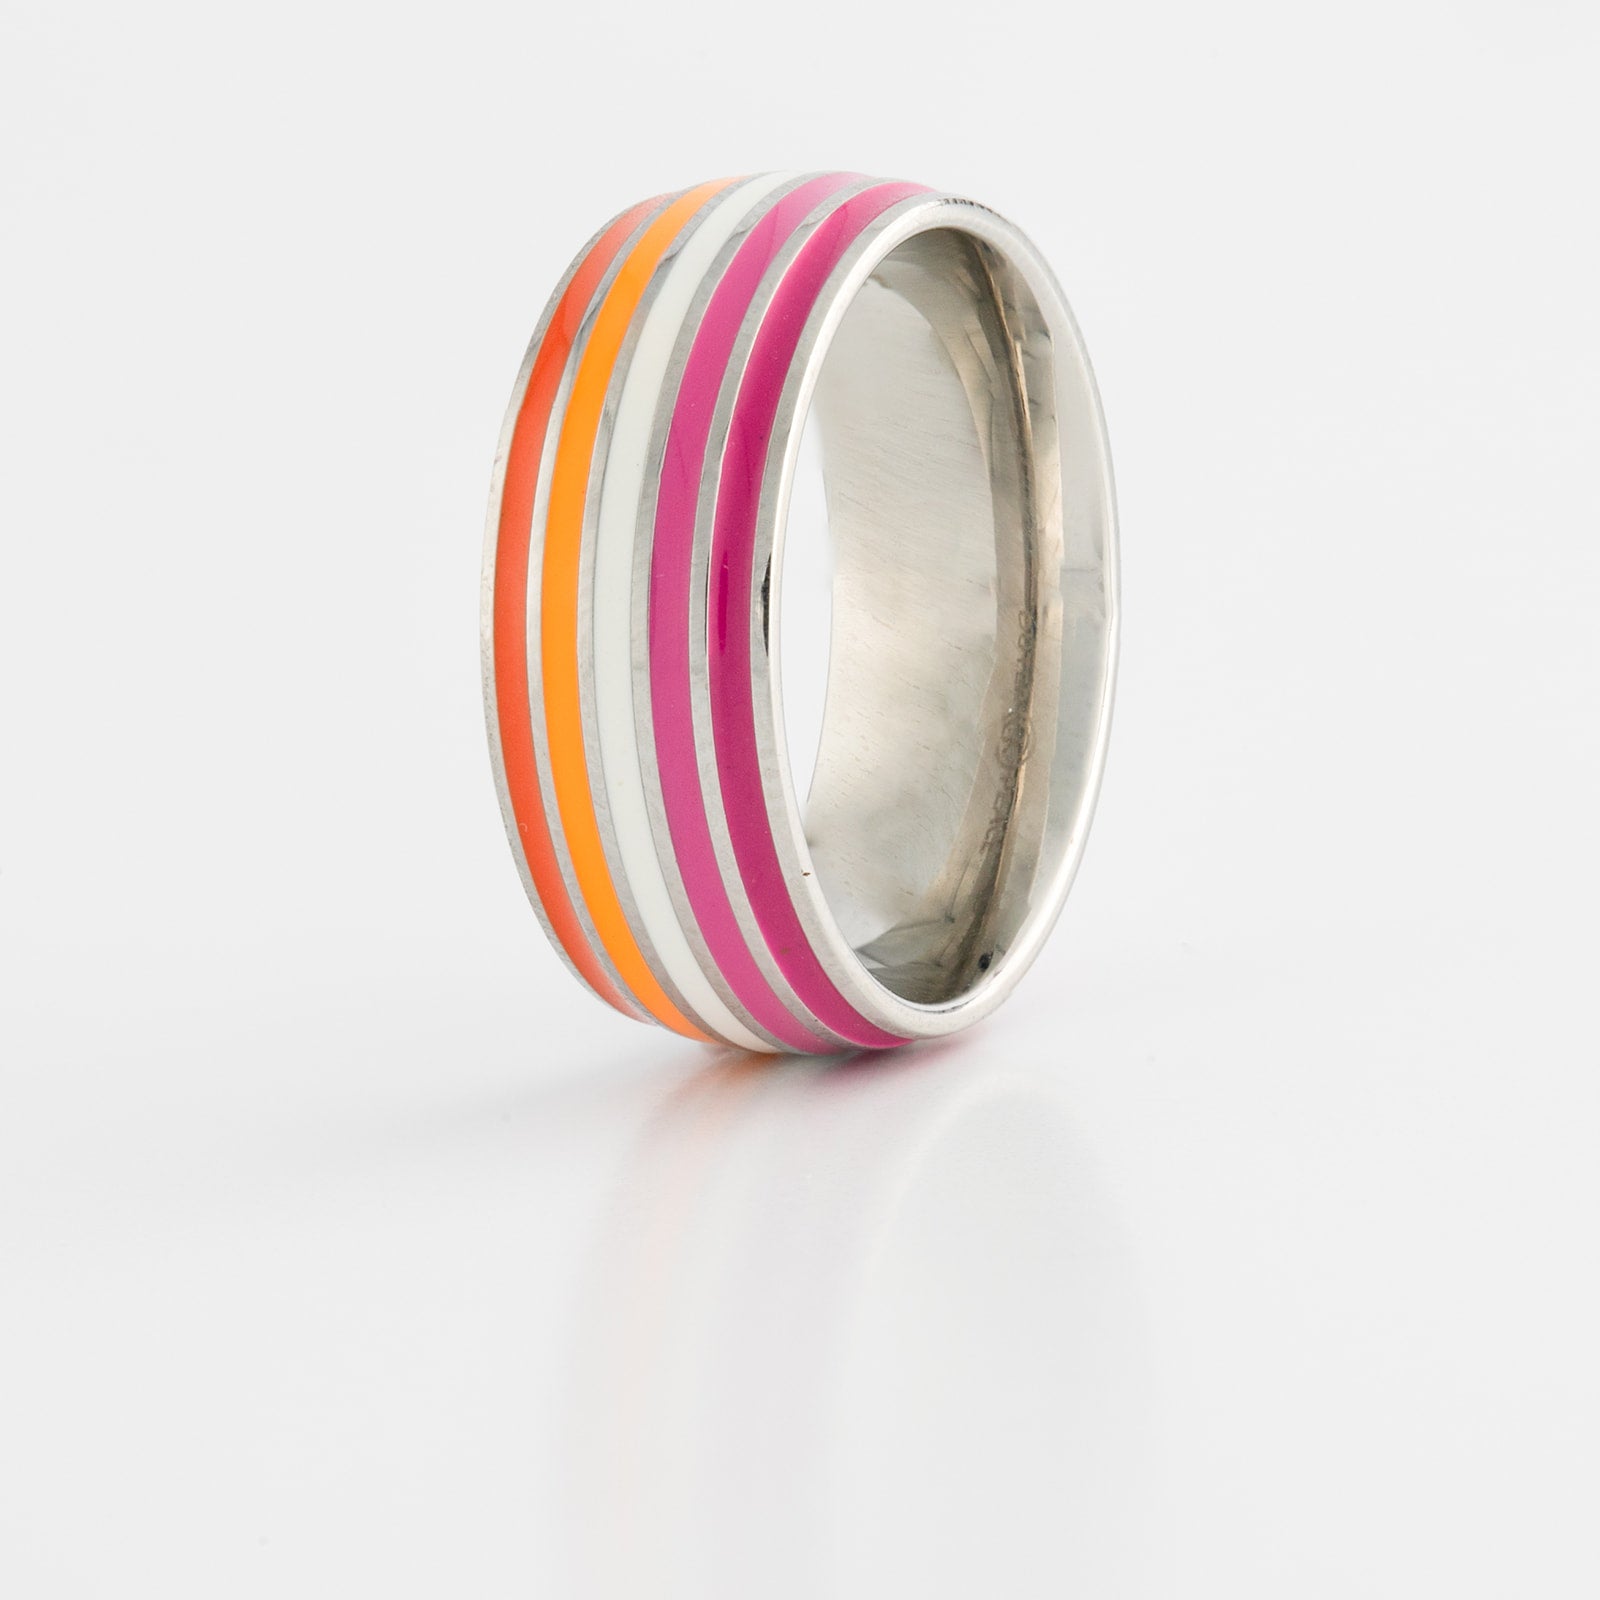 Show your Pride with our Stainless Steel Lesbian Rings